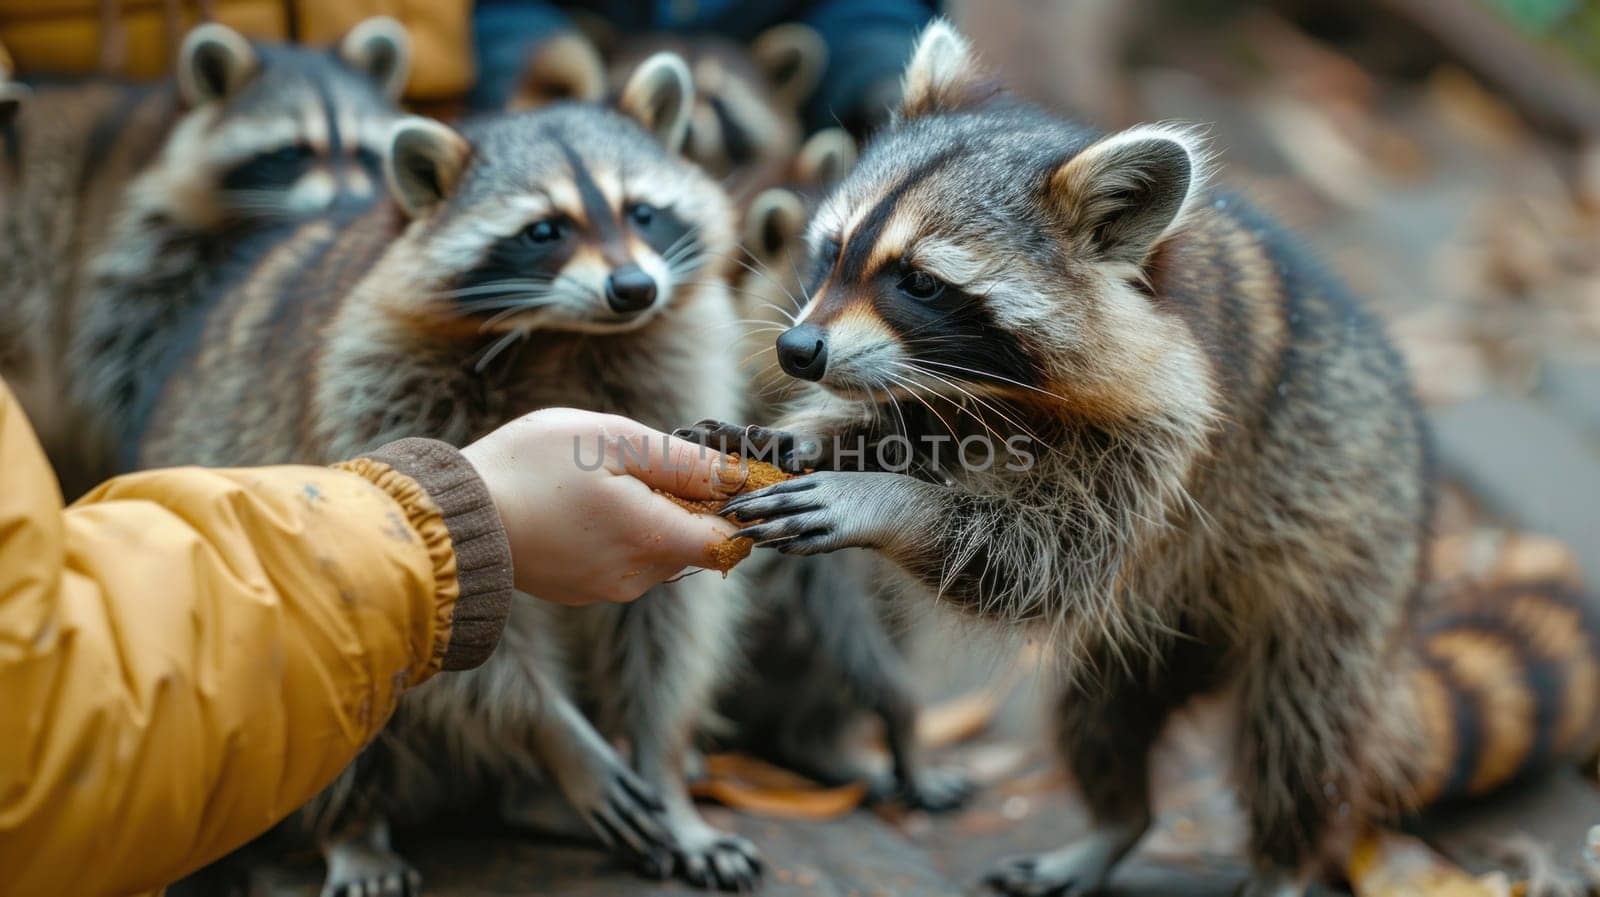 A man feeds a group of raccoons.